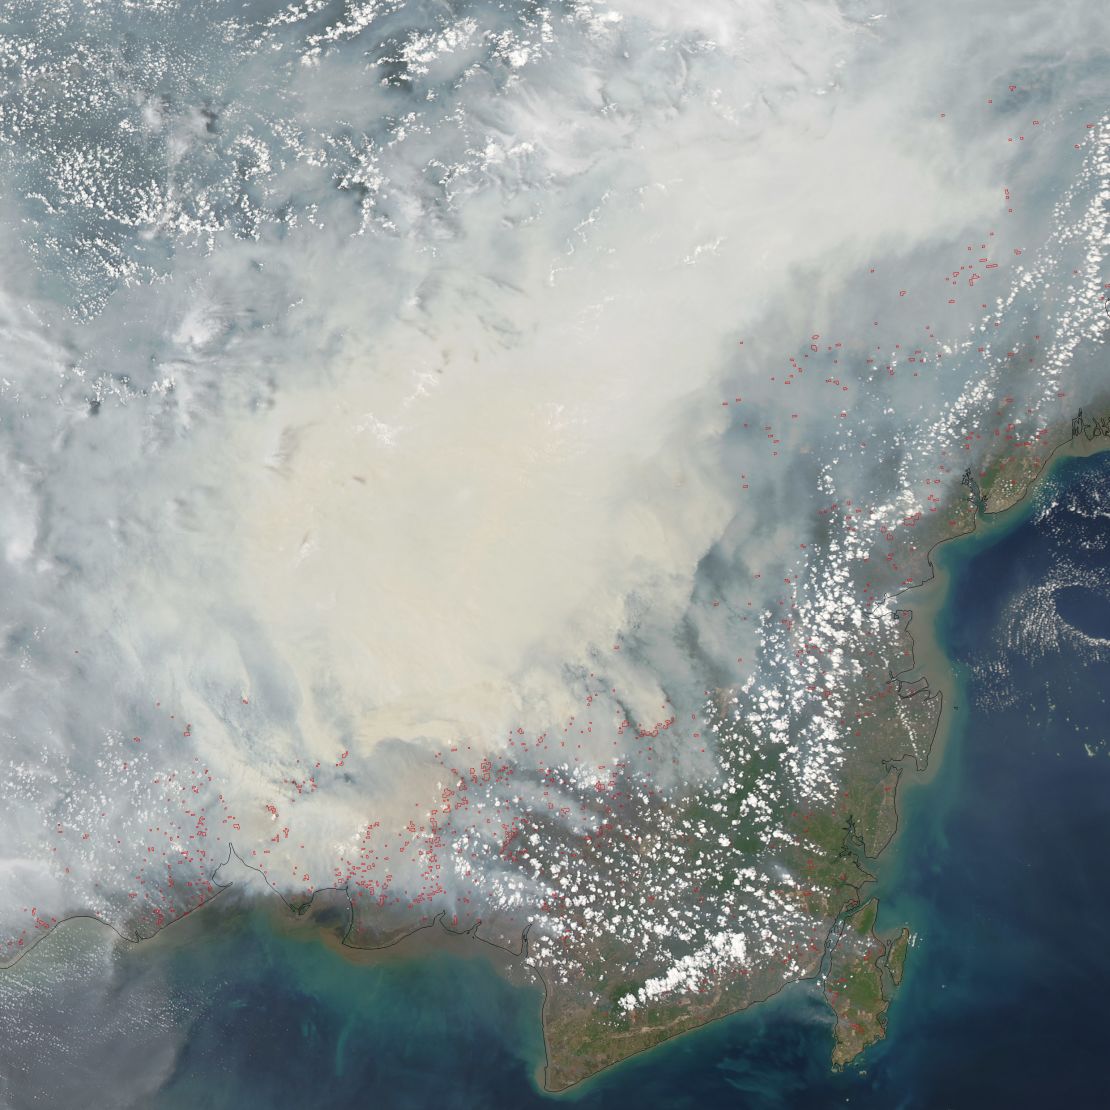 NASA's satellite captured this image of heavy smoke blanketing Borneo on October 19, 2015. The red outlines indicate areas where unusually warm surface temperatures associated with peat fires are detected.